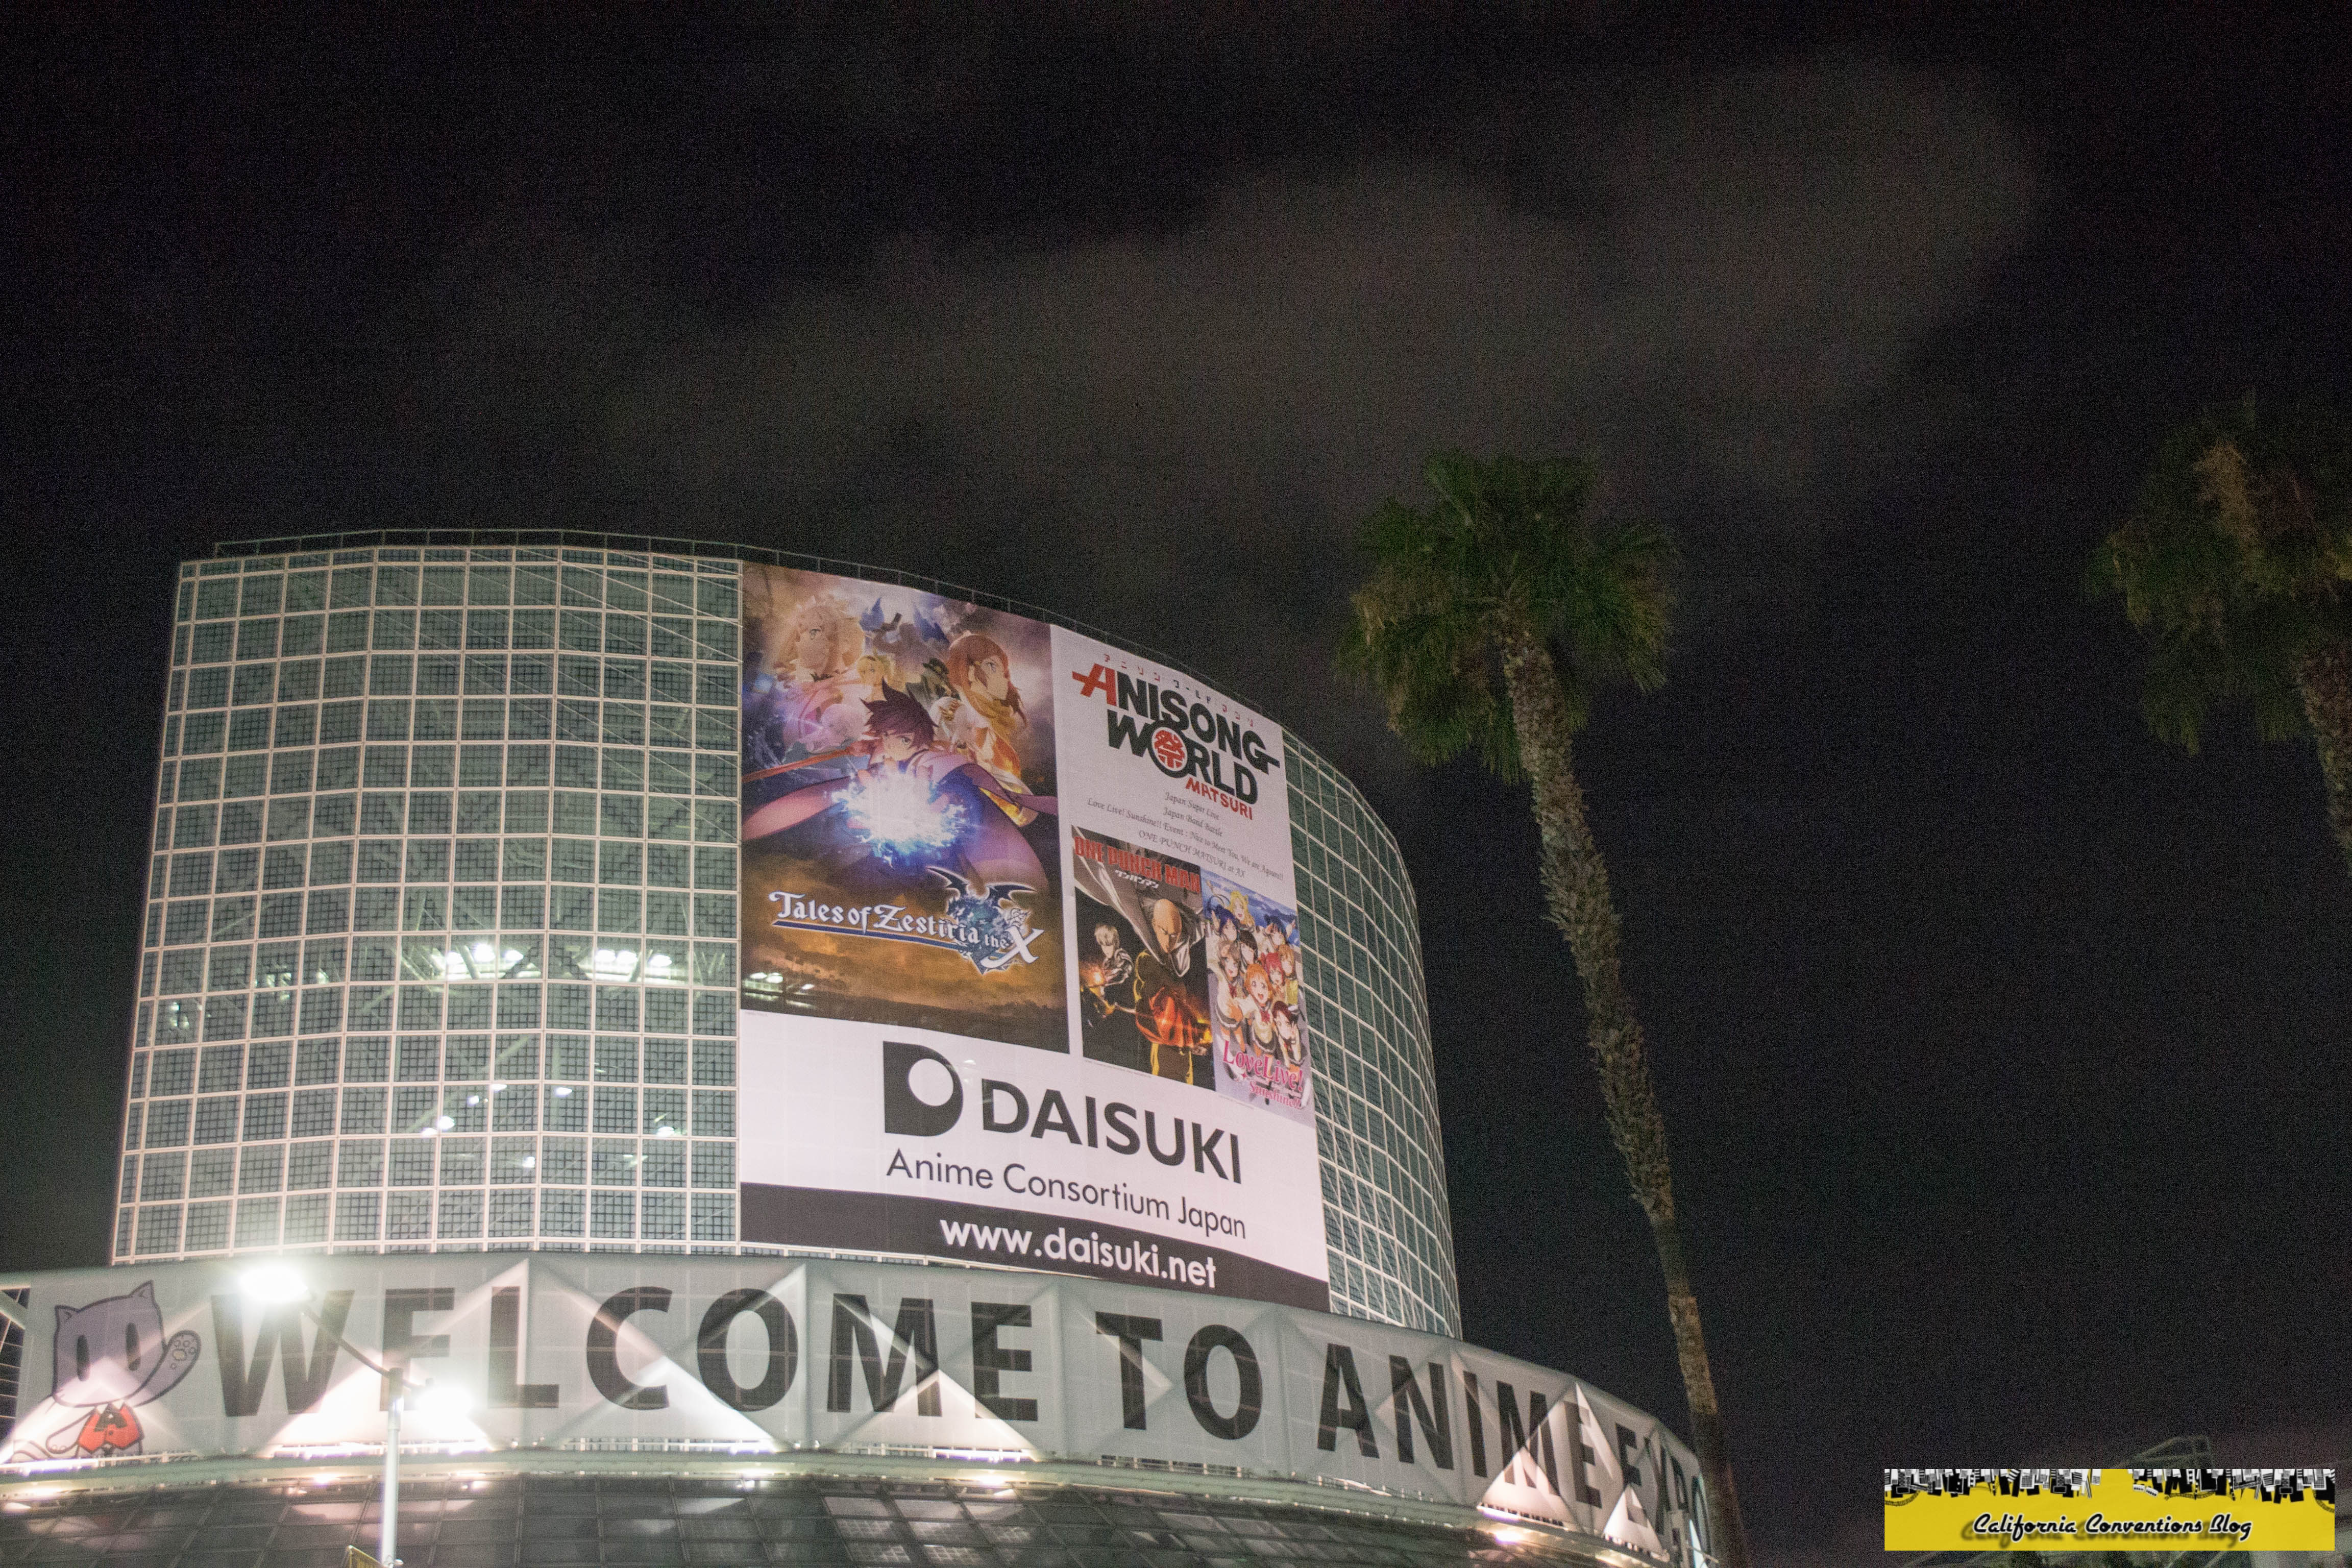 California Conventions Blog: Ryan Reports Anime Expo 2016: Day 3 - Is it  True?!? Waifu's That Fly You To The Moon!